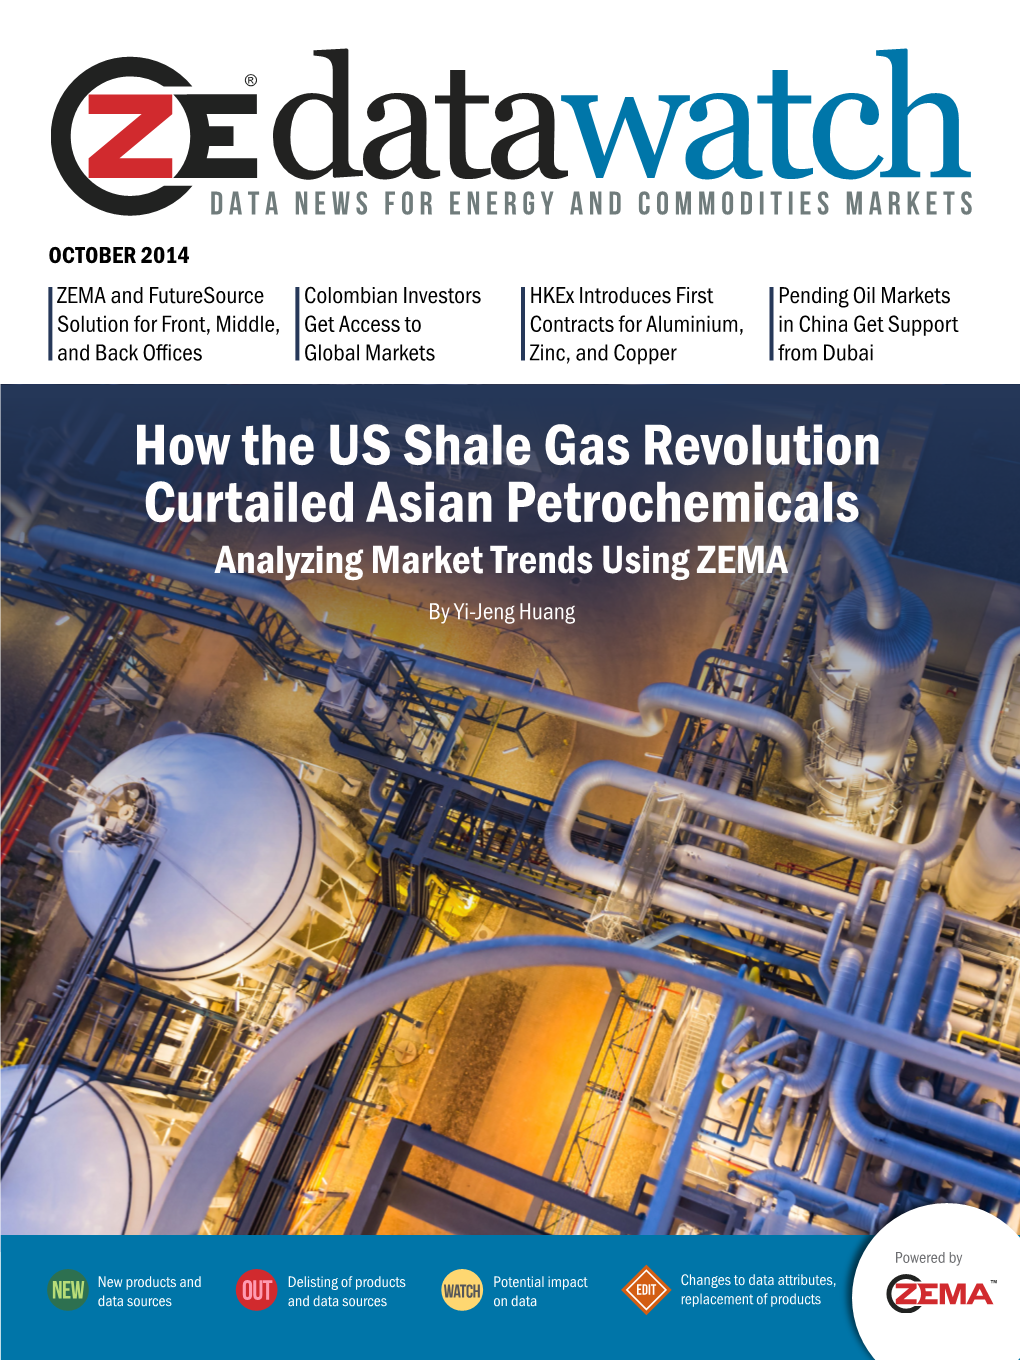 How the US Shale Gas Revolution Curtailed Asian Petrochemicals Analyzing Market Trends Using ZEMA by Yi-Jeng Huang